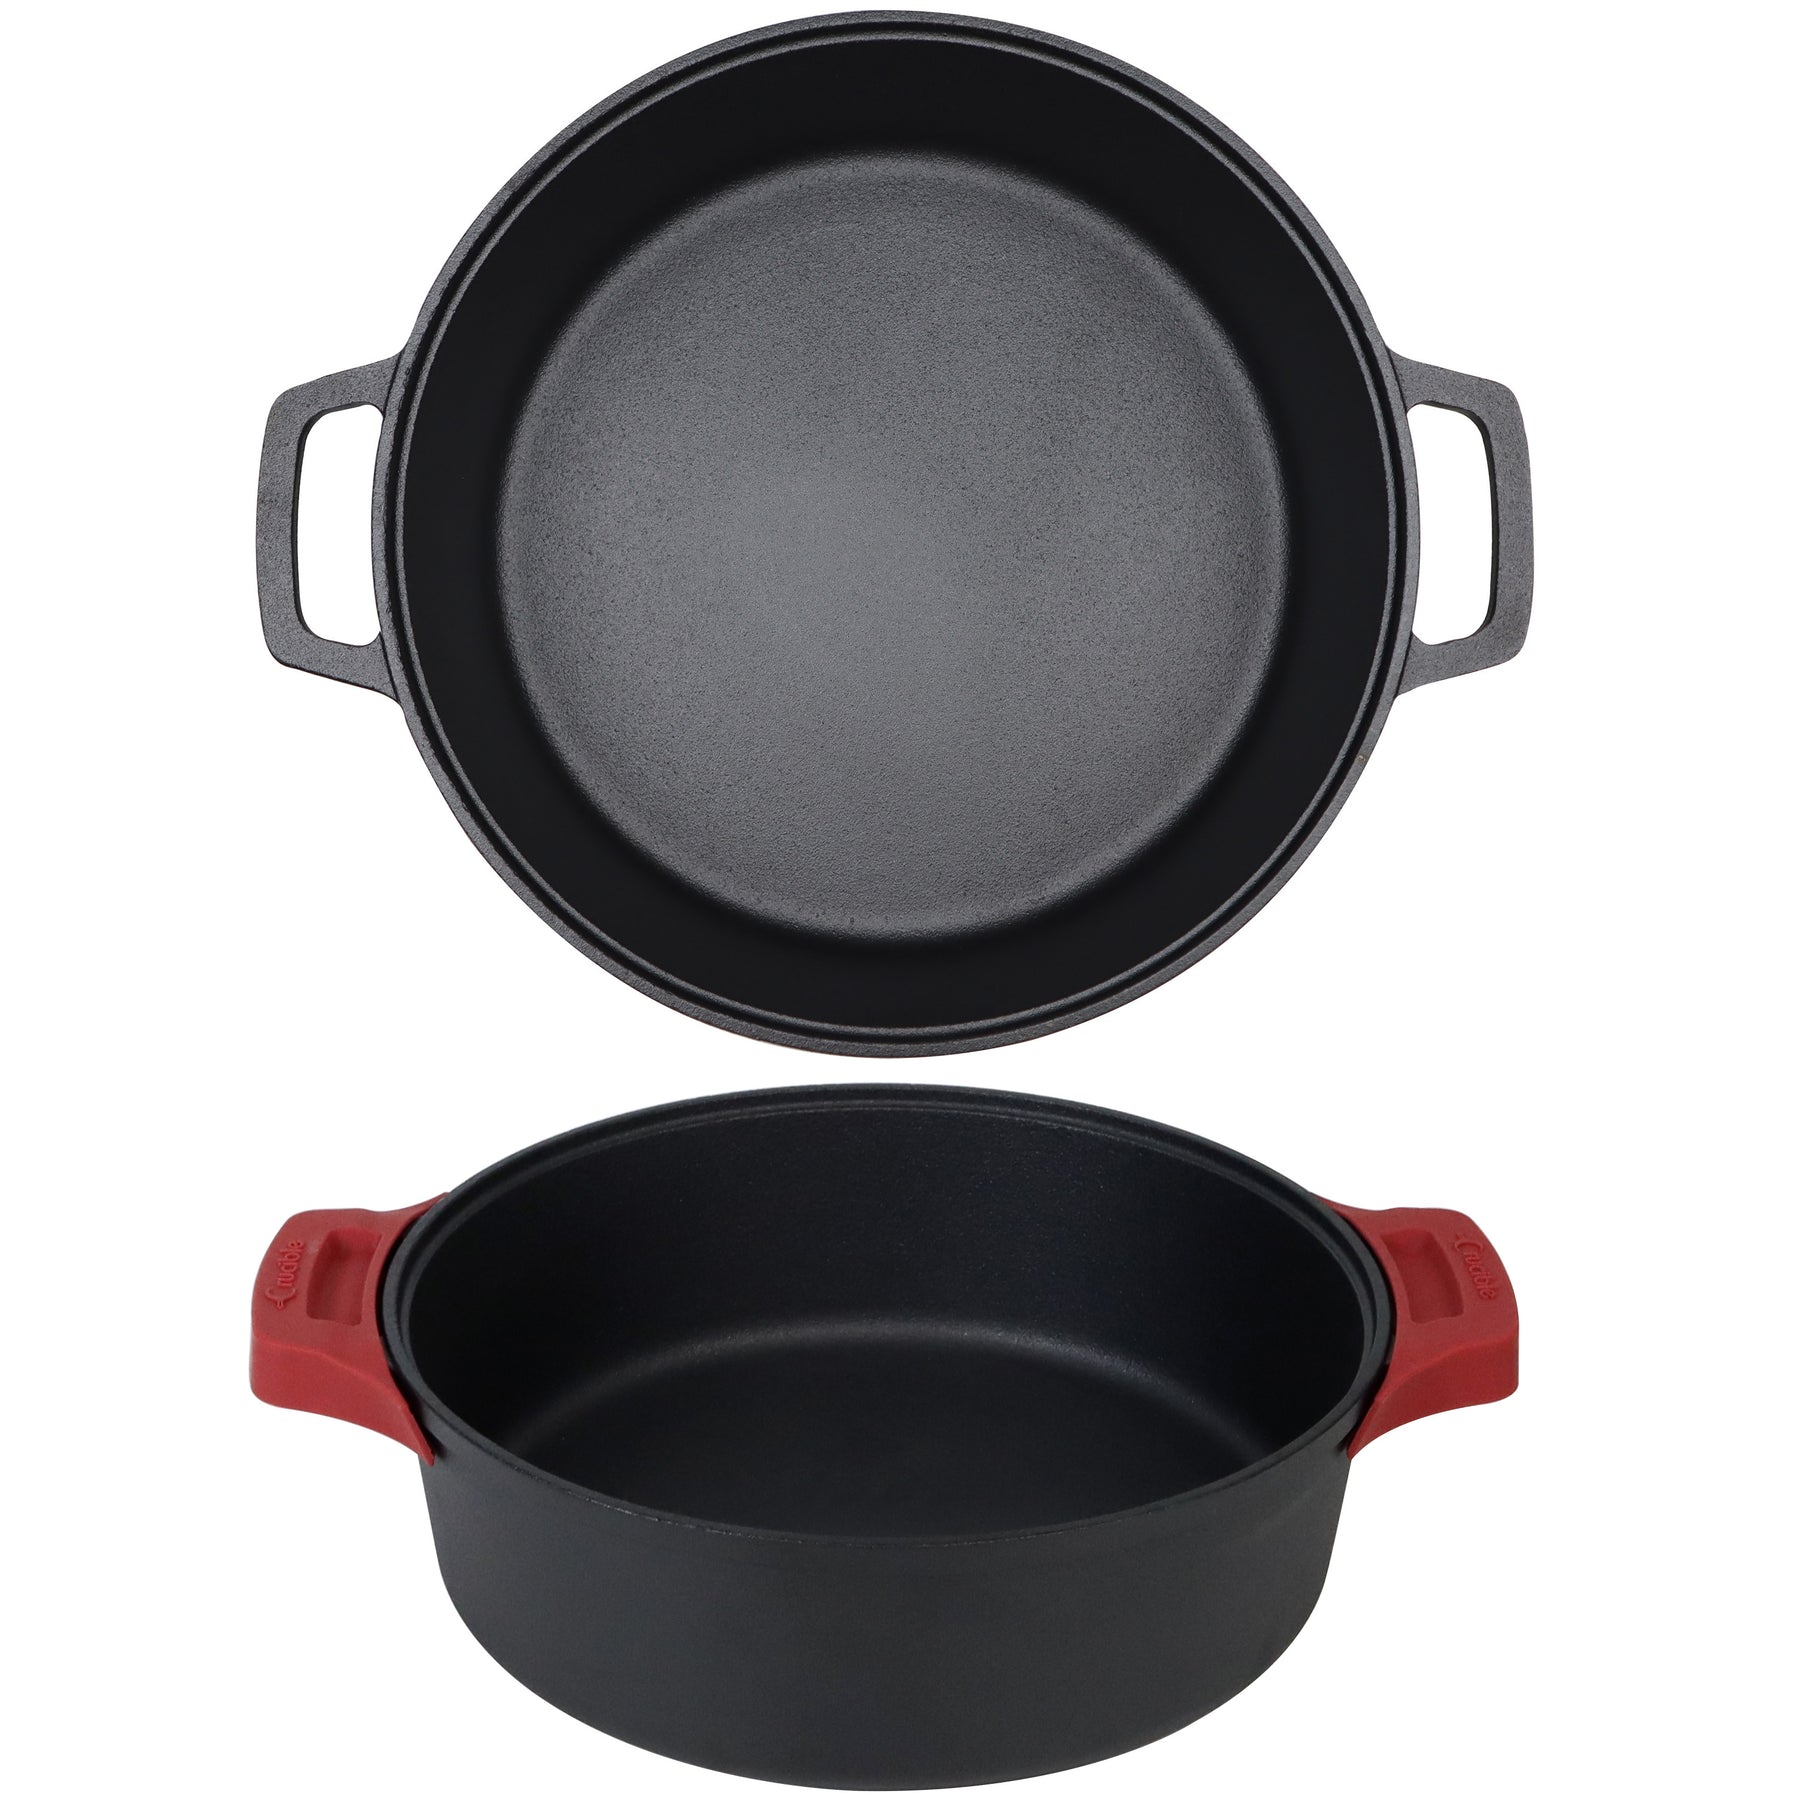 Crucible Cookware Silicone Hot Handle Holder (2-Pack) for Cast Iron Woks, Pots, Dutch Ovens, Small Skillets, Assist Handle, Oven Trays, Plates - Potholders - Red